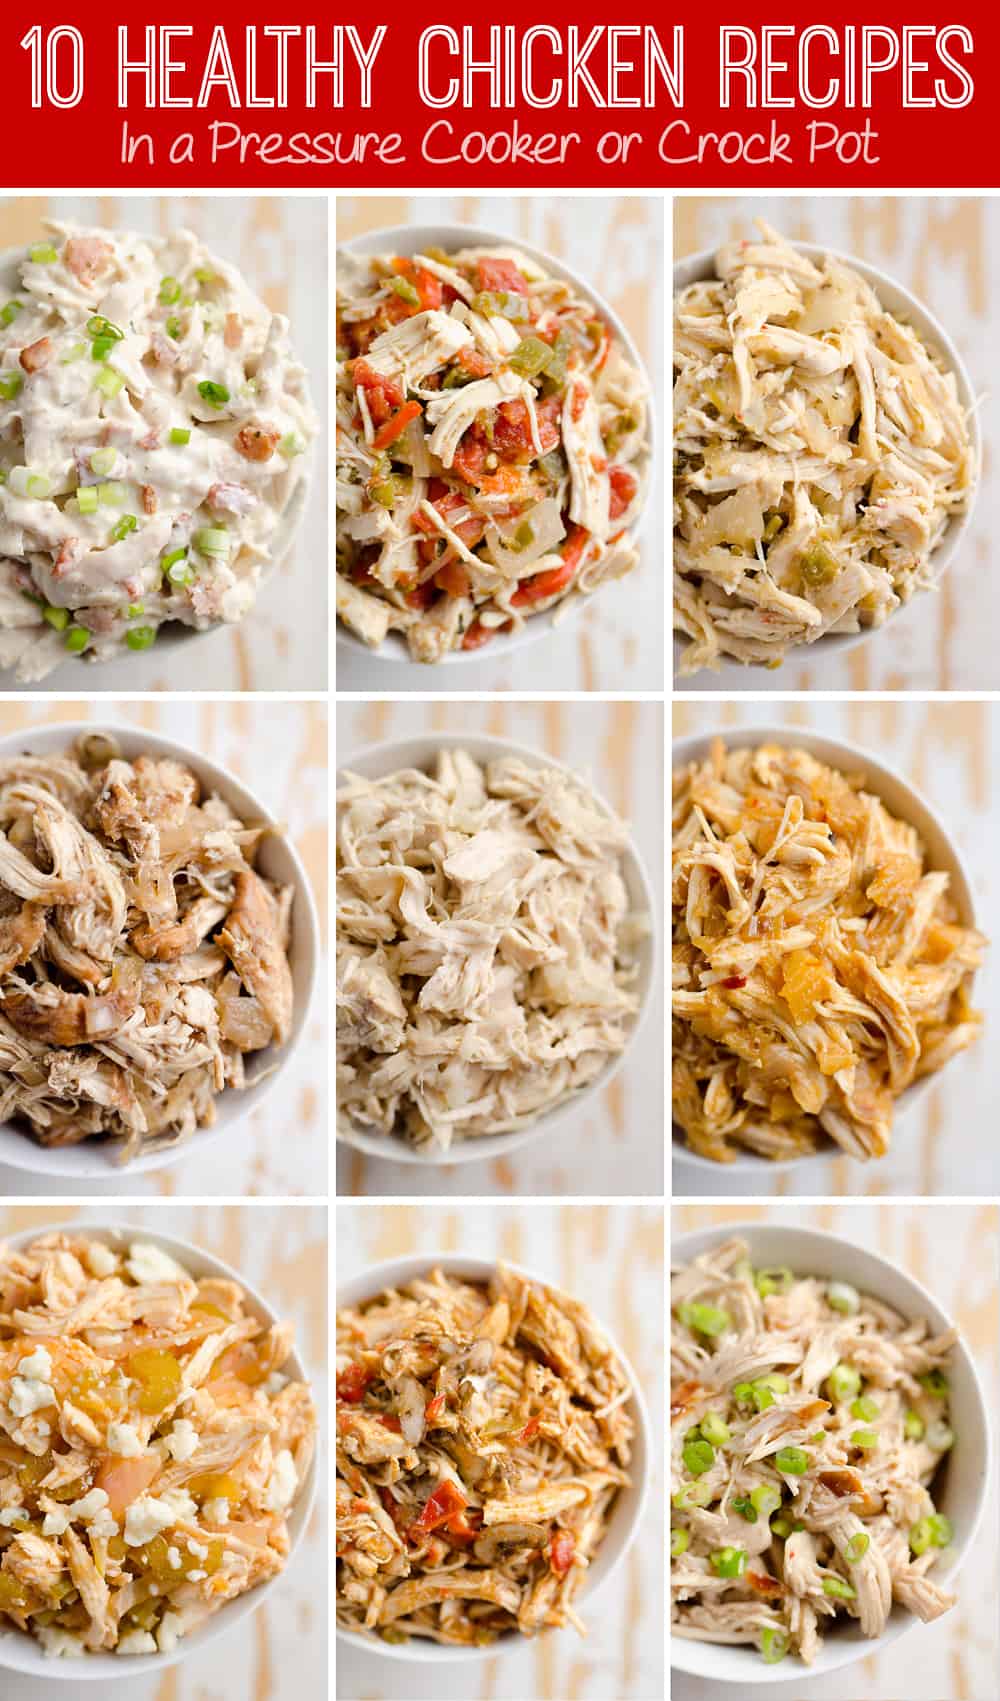 10 Healthy Chicken Recipes In A Pressure Cooker Or Crock Pot